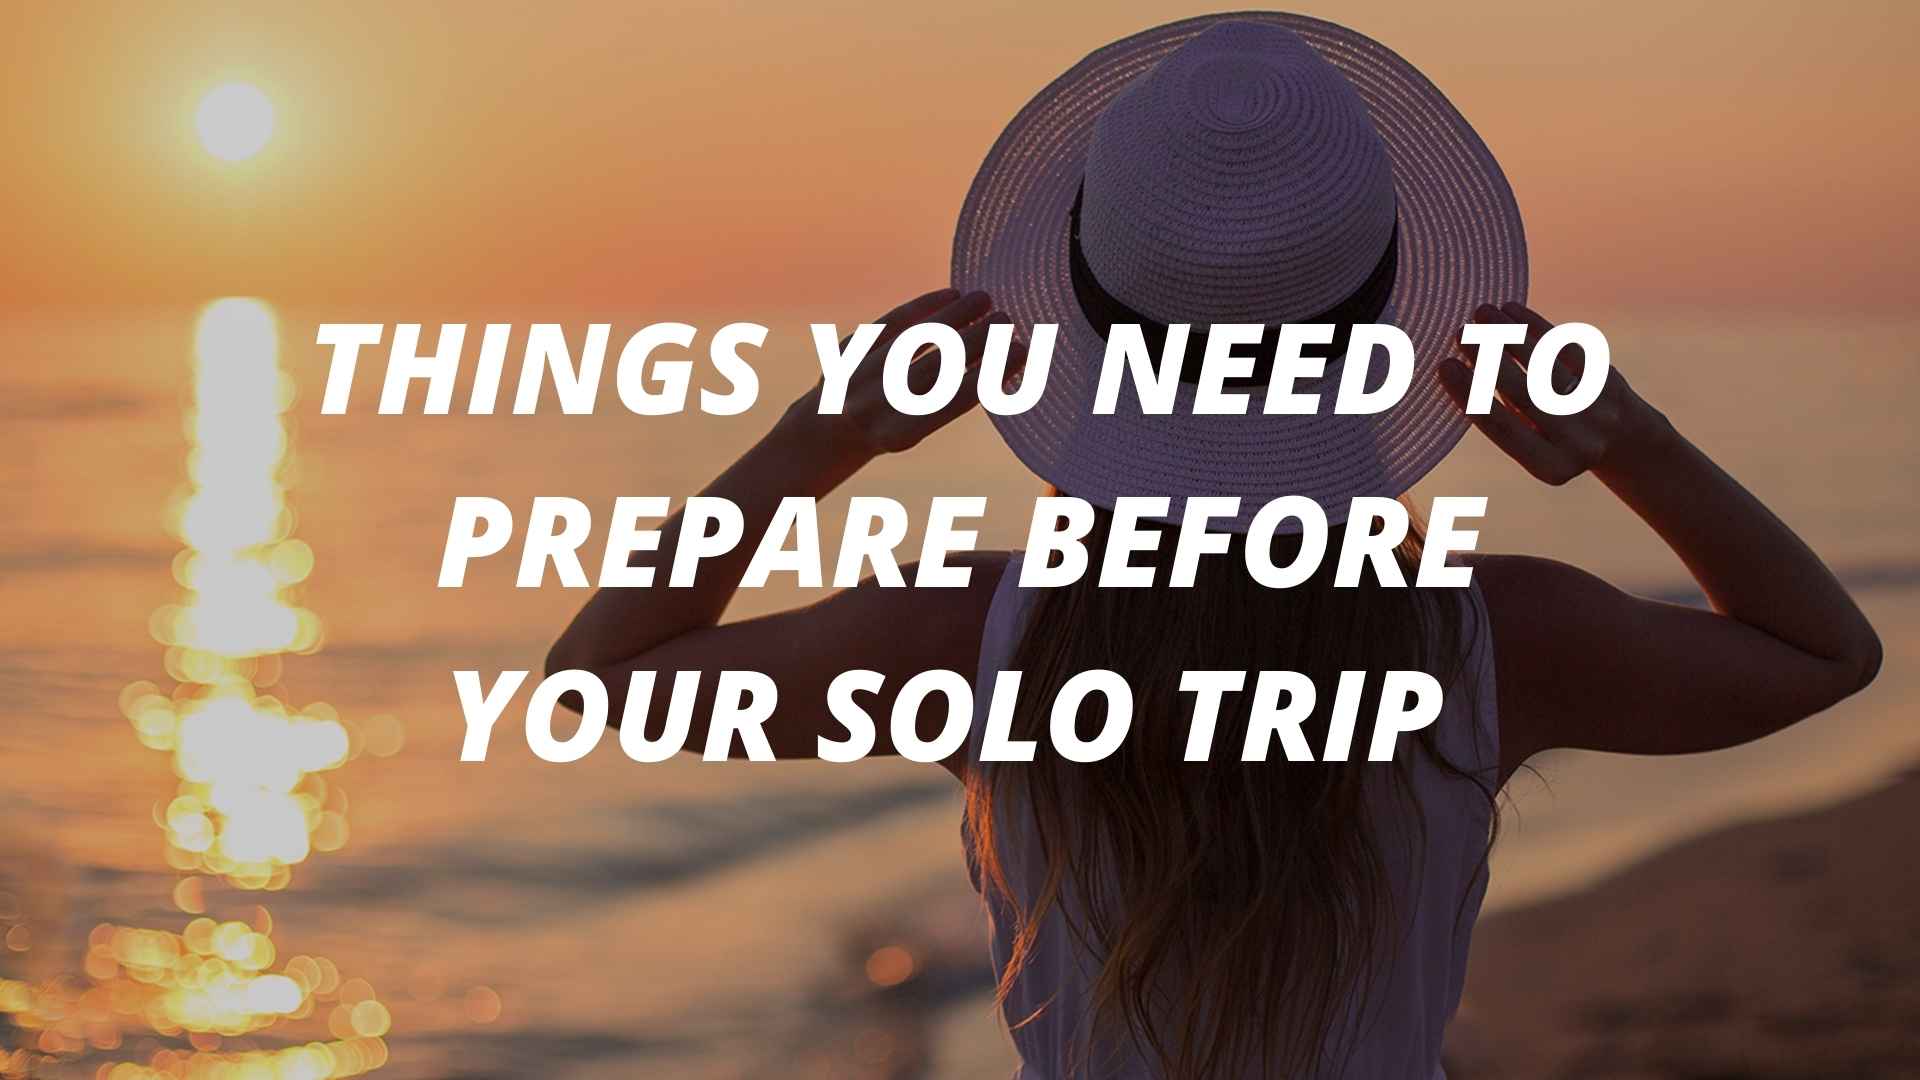 THINGS YOU NEED TO PREPARE BEFORE YOUR SOLO TRIP